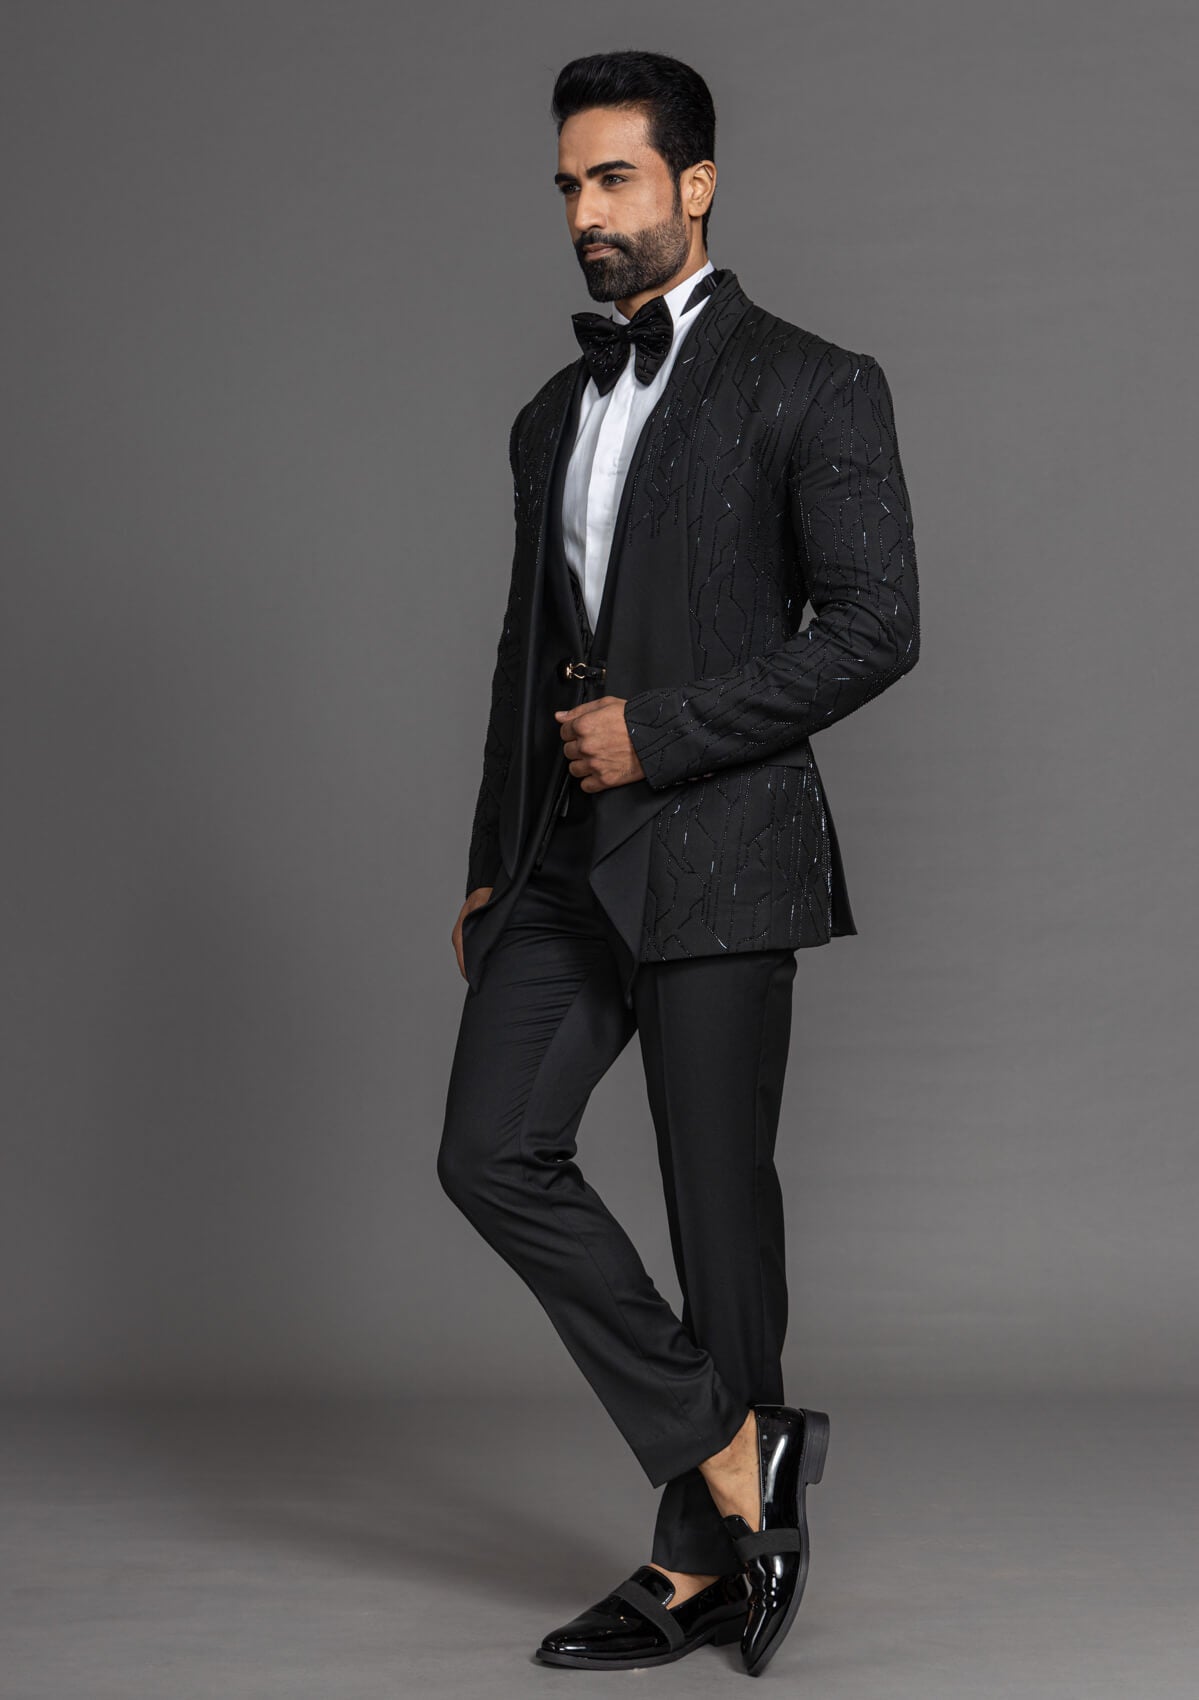 Classic men's business suit with a tailored fit